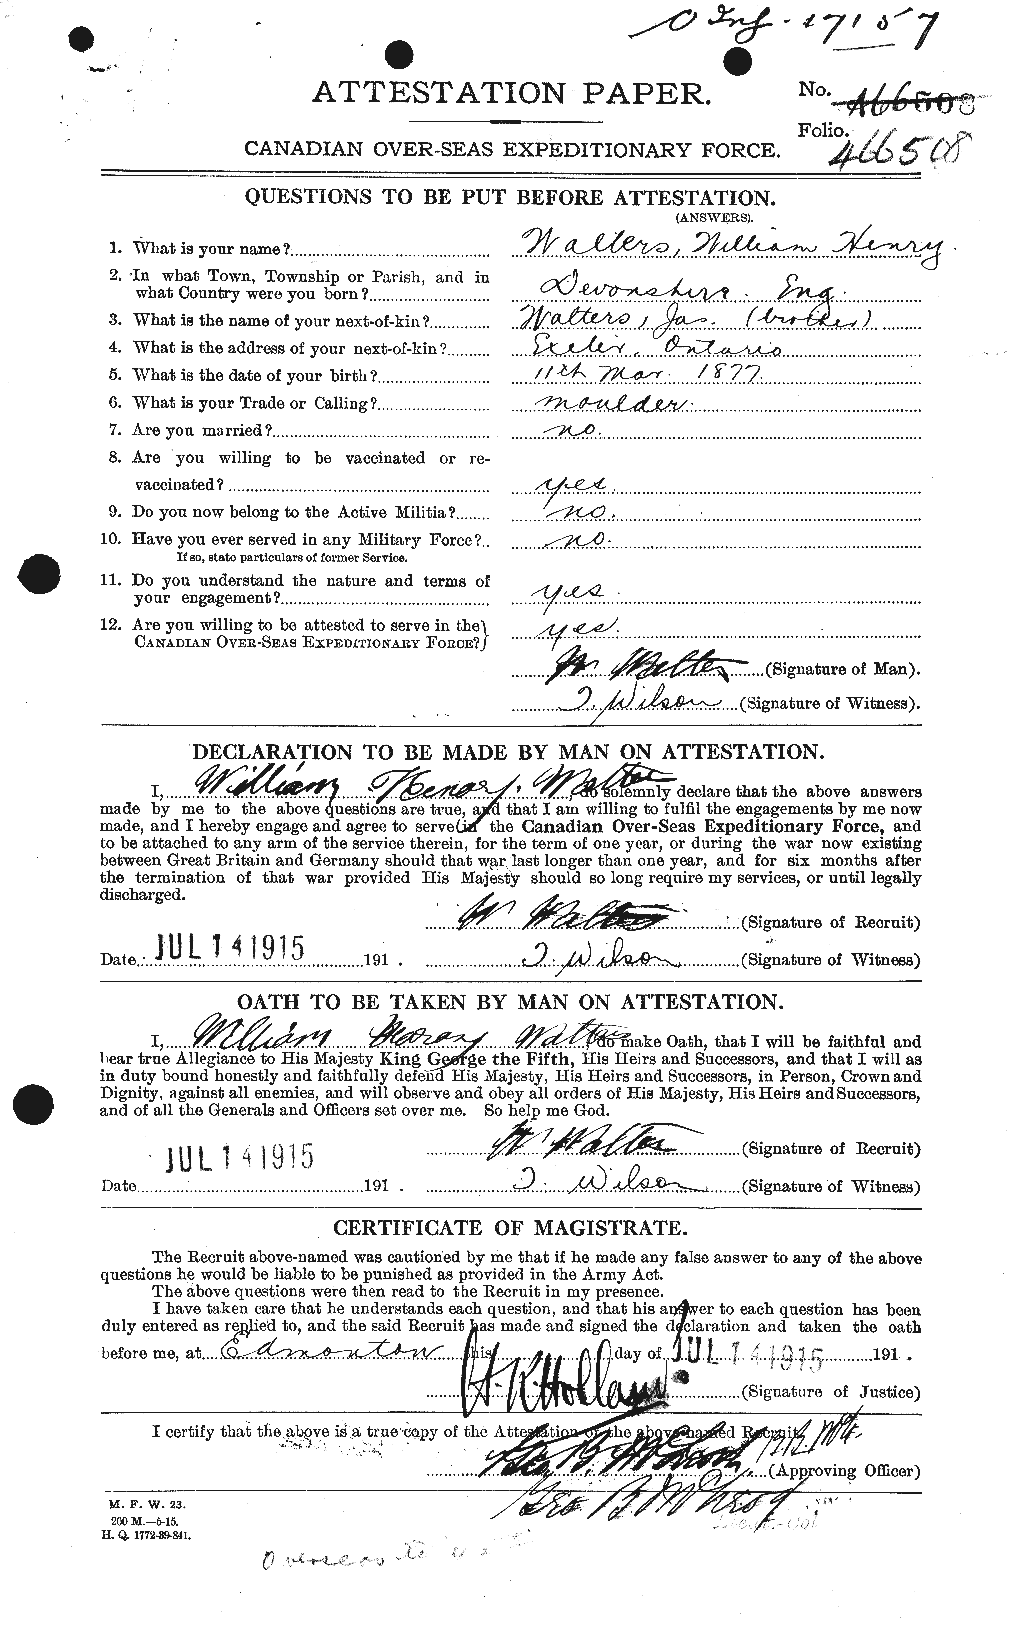 Personnel Records of the First World War - CEF 655475a